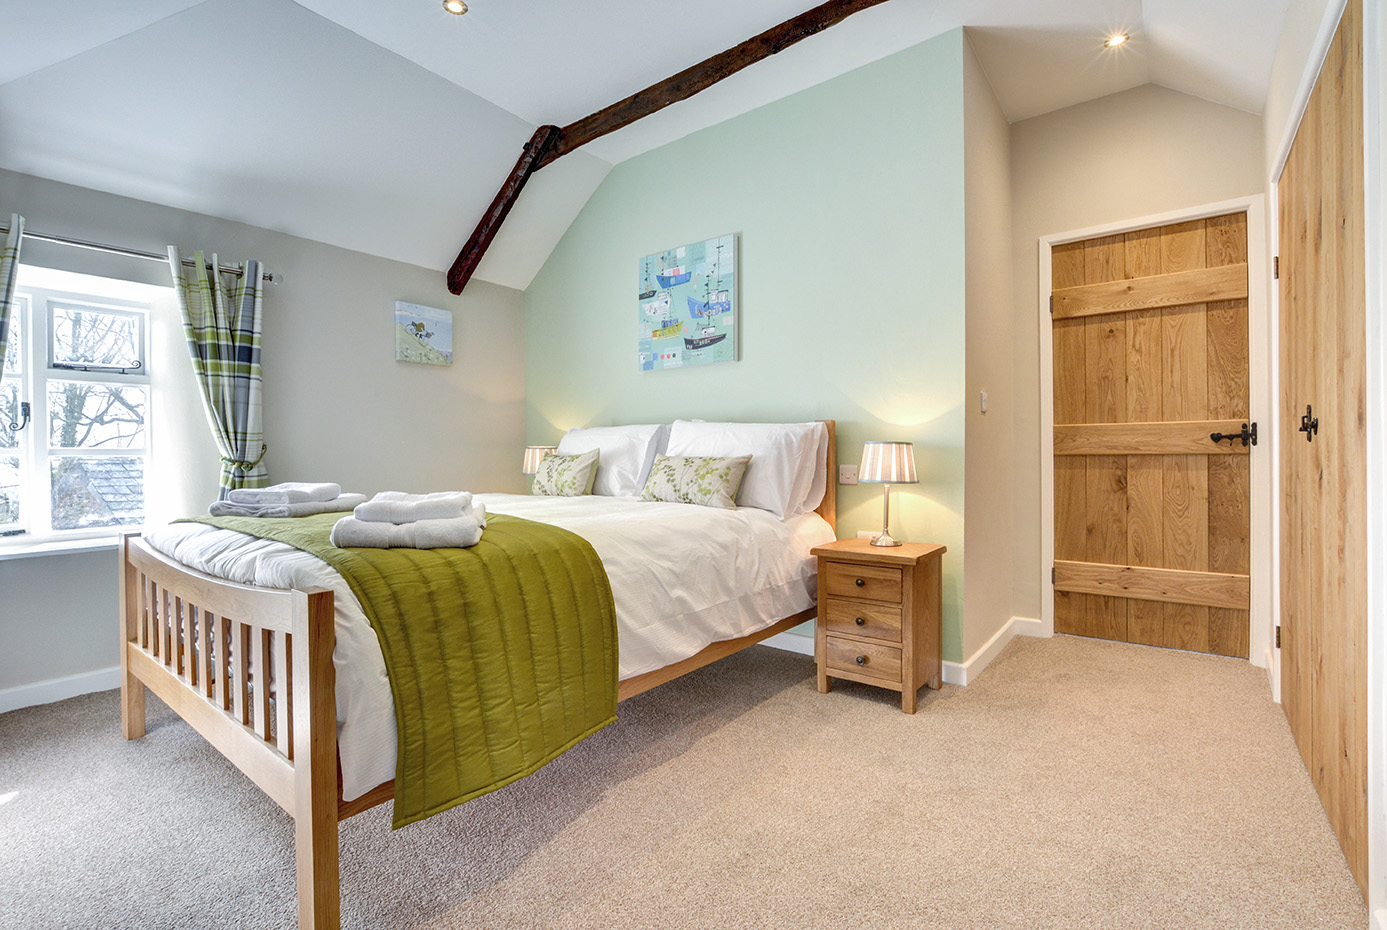 The second bedroom of Otterbridge luxury self catering converted barn holiday cottage at Penrose Burden in North Cornwall01.jpg